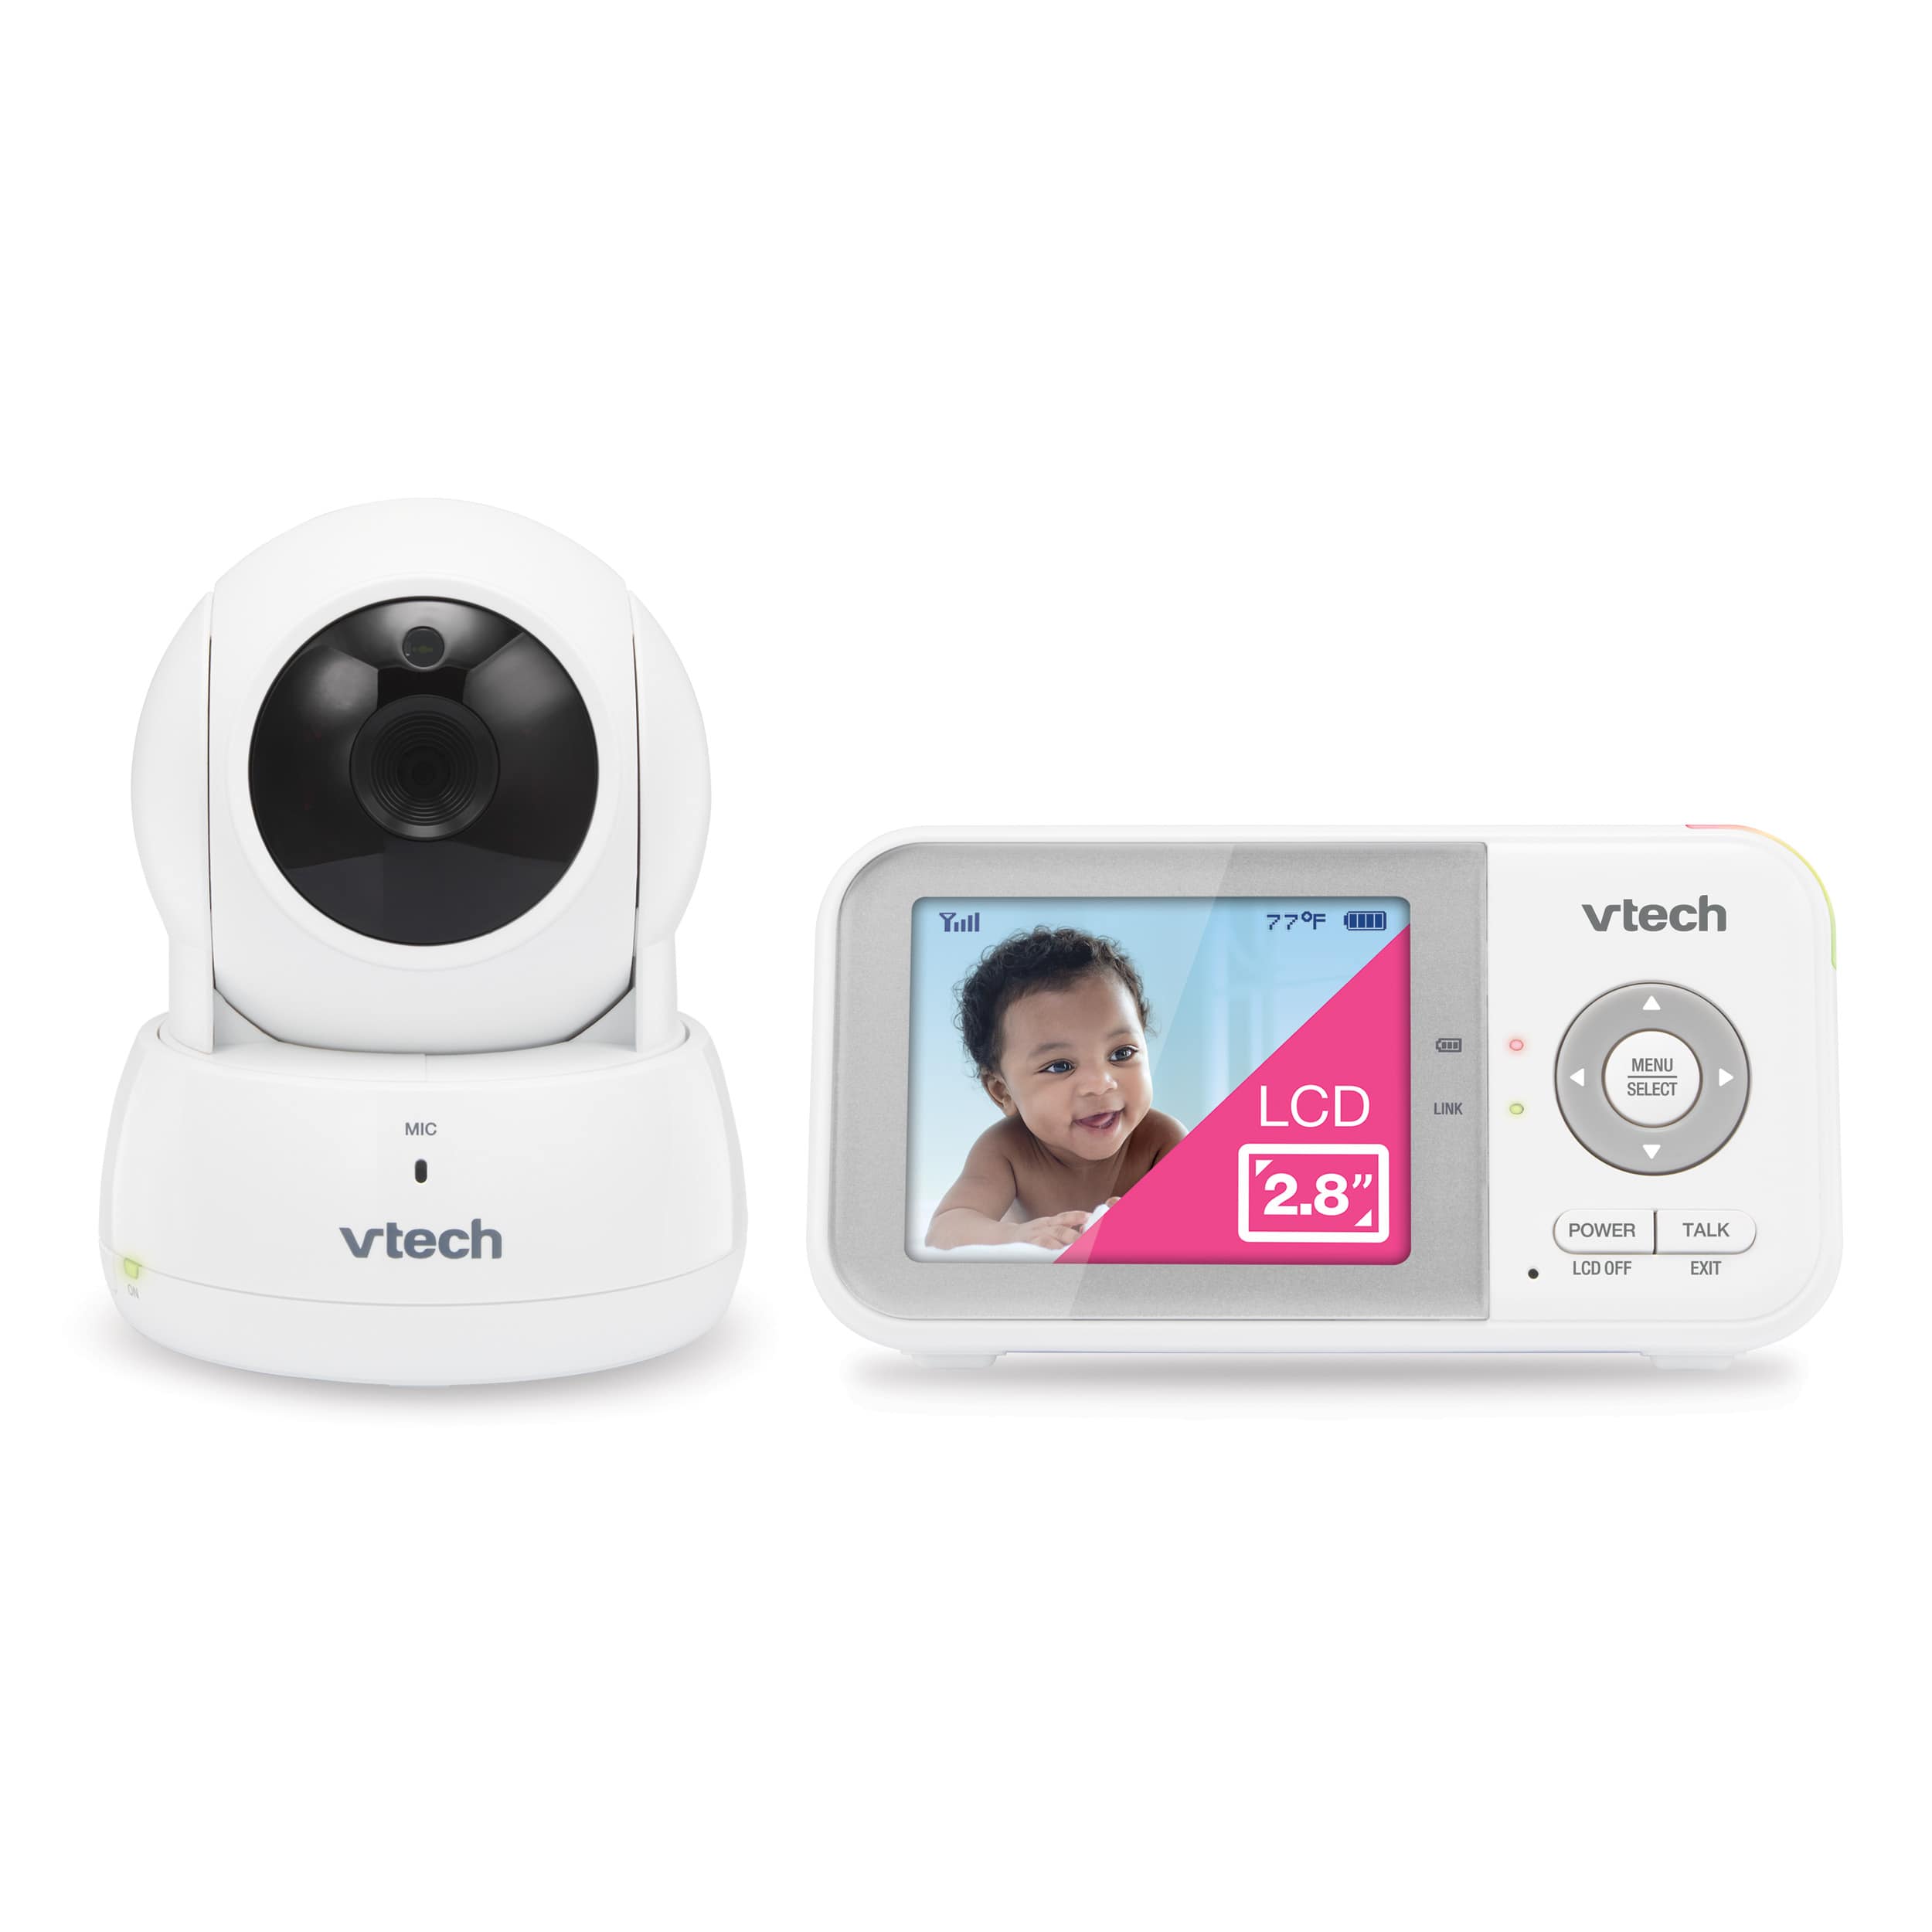 2.8" Digital Video Baby Monitor with Pan & Tilt - view 1